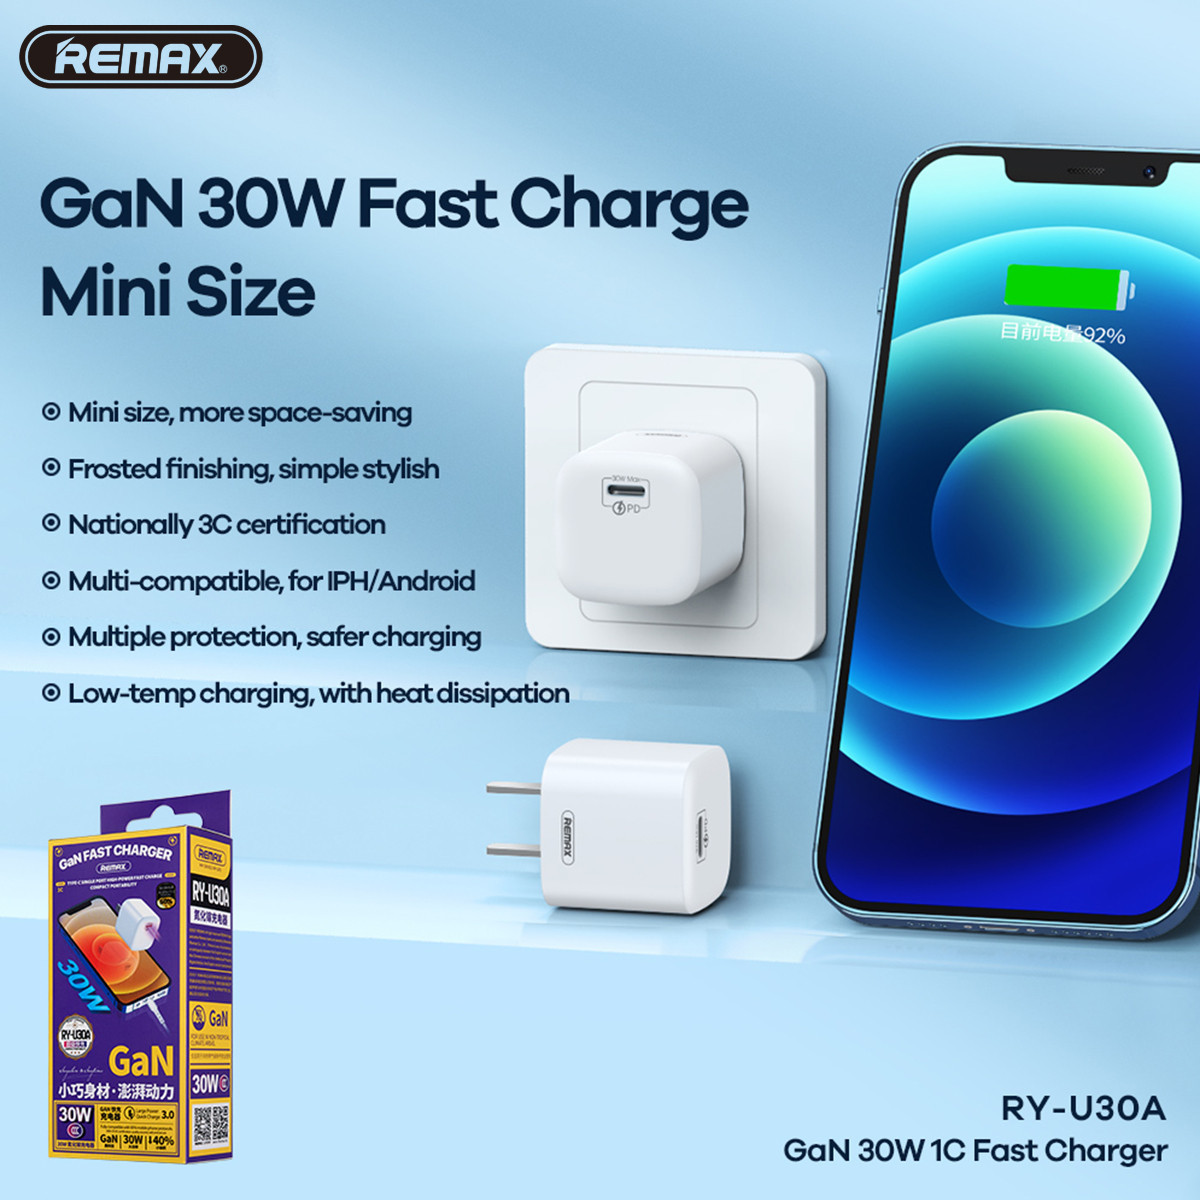 Remax RY-U30A 30W GaN PD Fast Charger Type-C Single Port High-Power Fast Charge Compact Portability